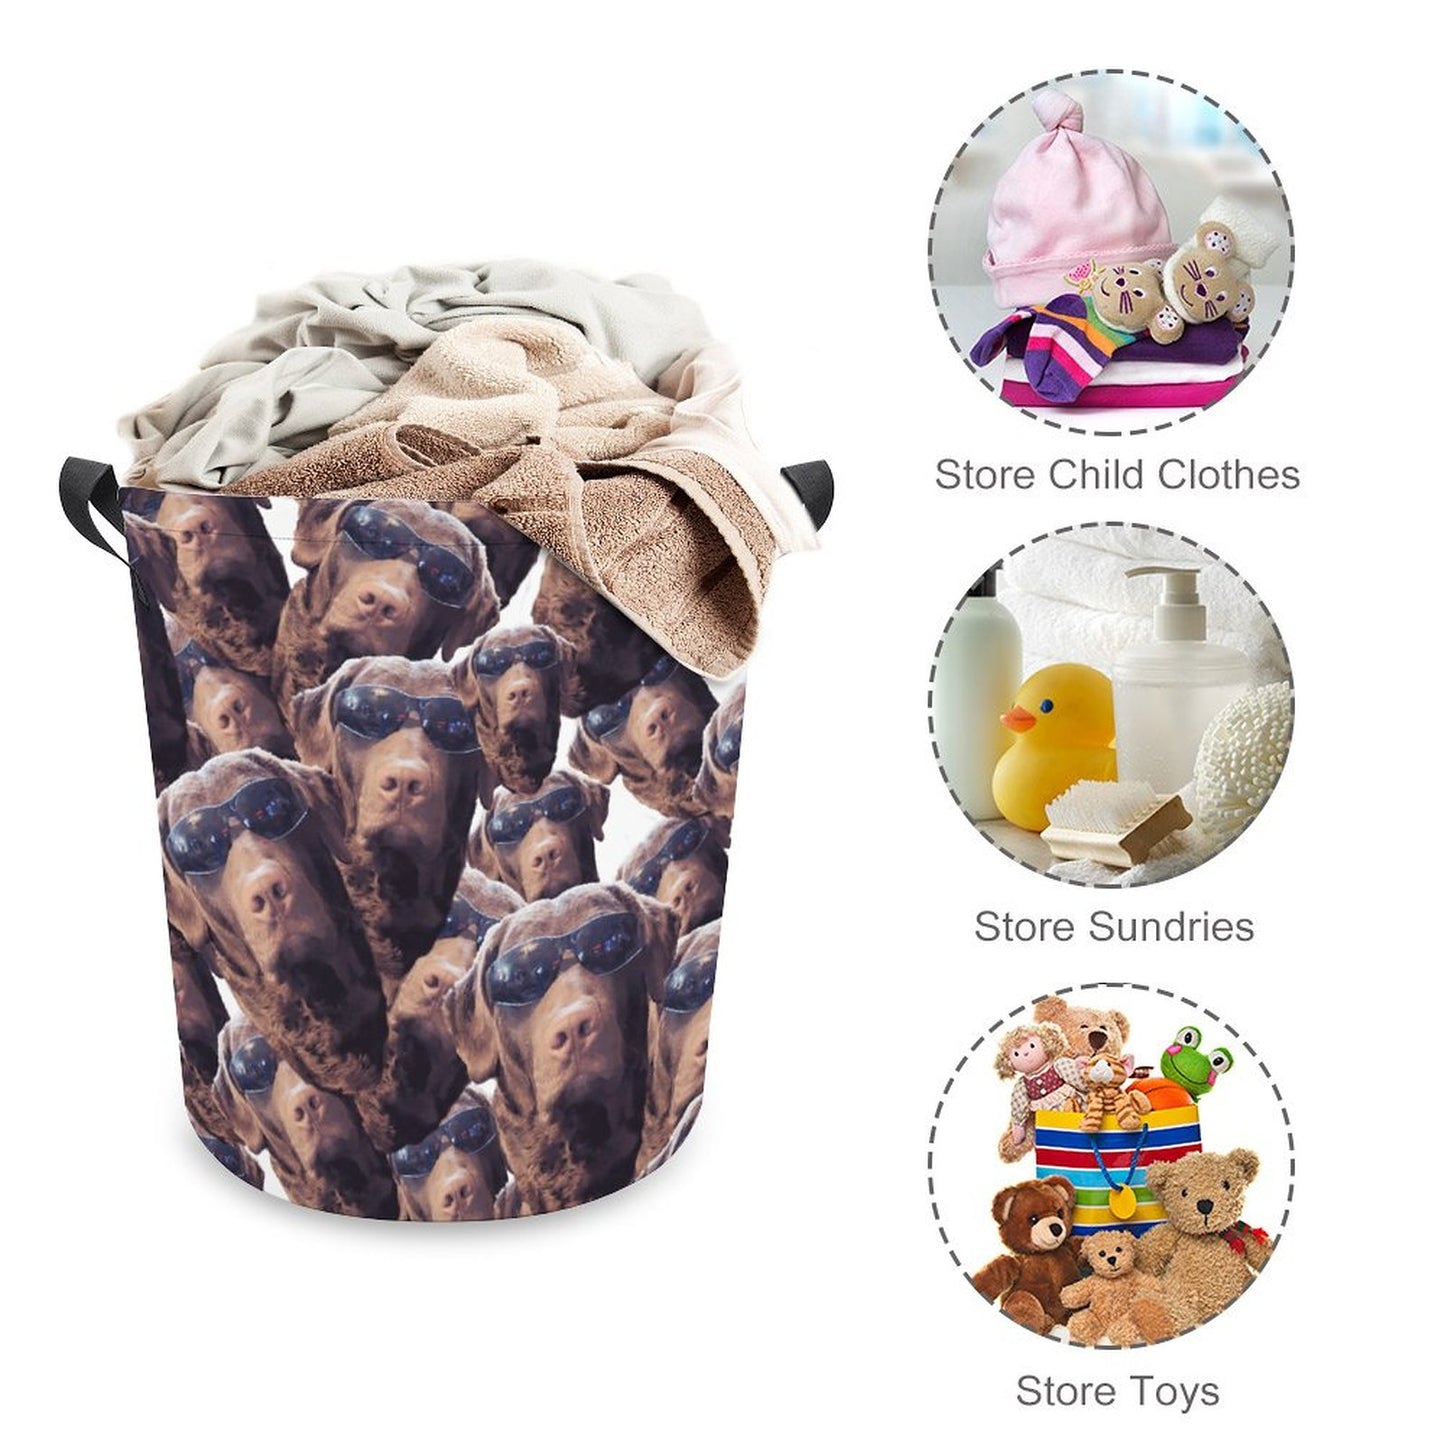 FOXY LADY _ LAB _ COLLAGE FACE DESIGN -Collapsible Laundry Basket